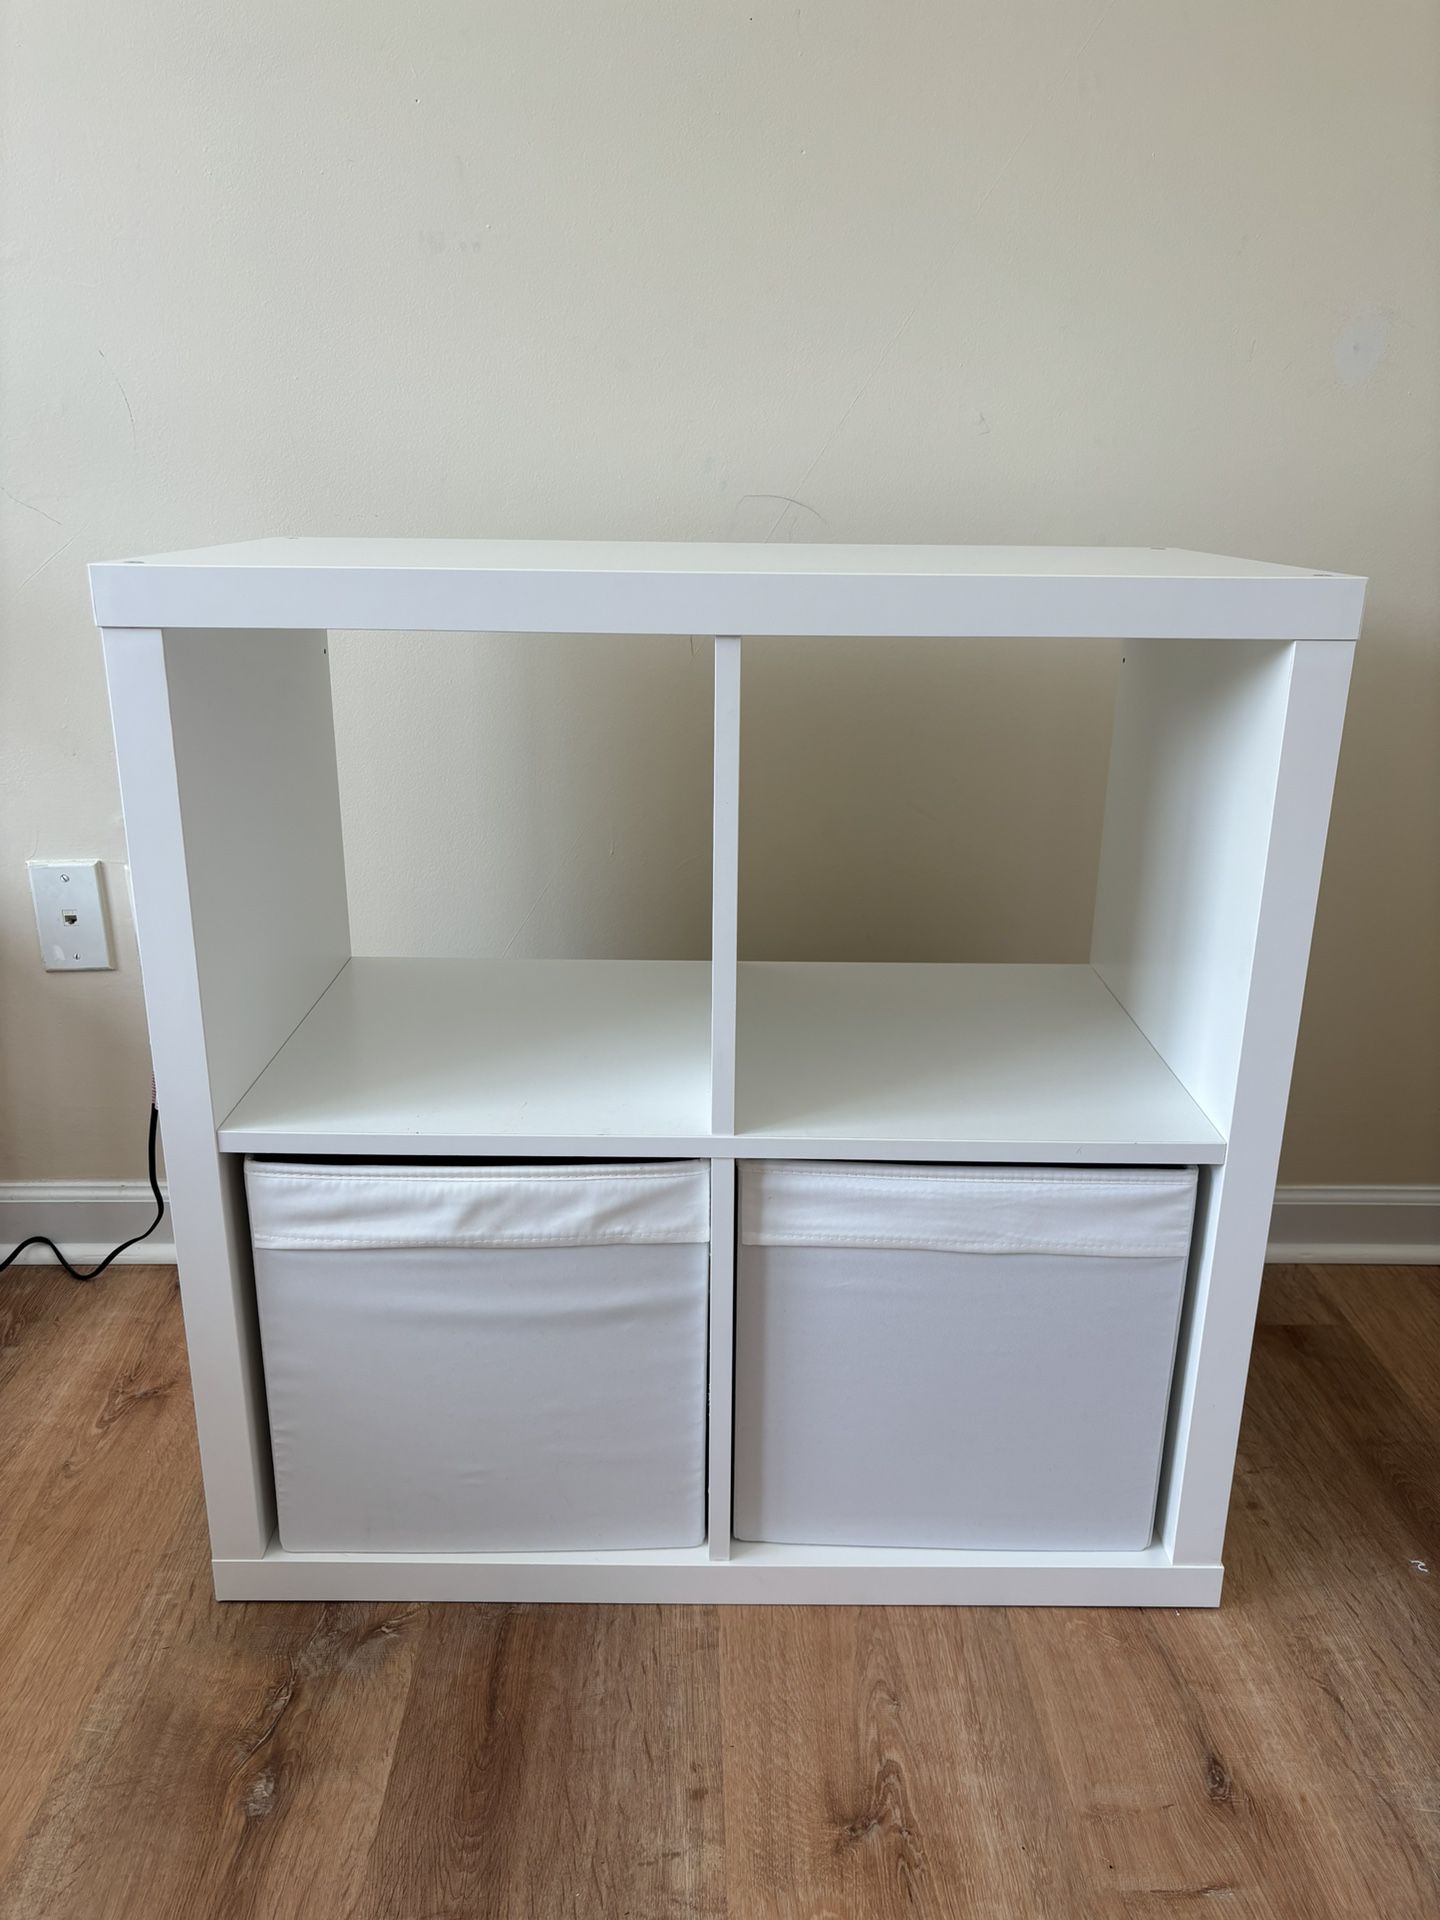 IKEA Shelves With 2 Boxes